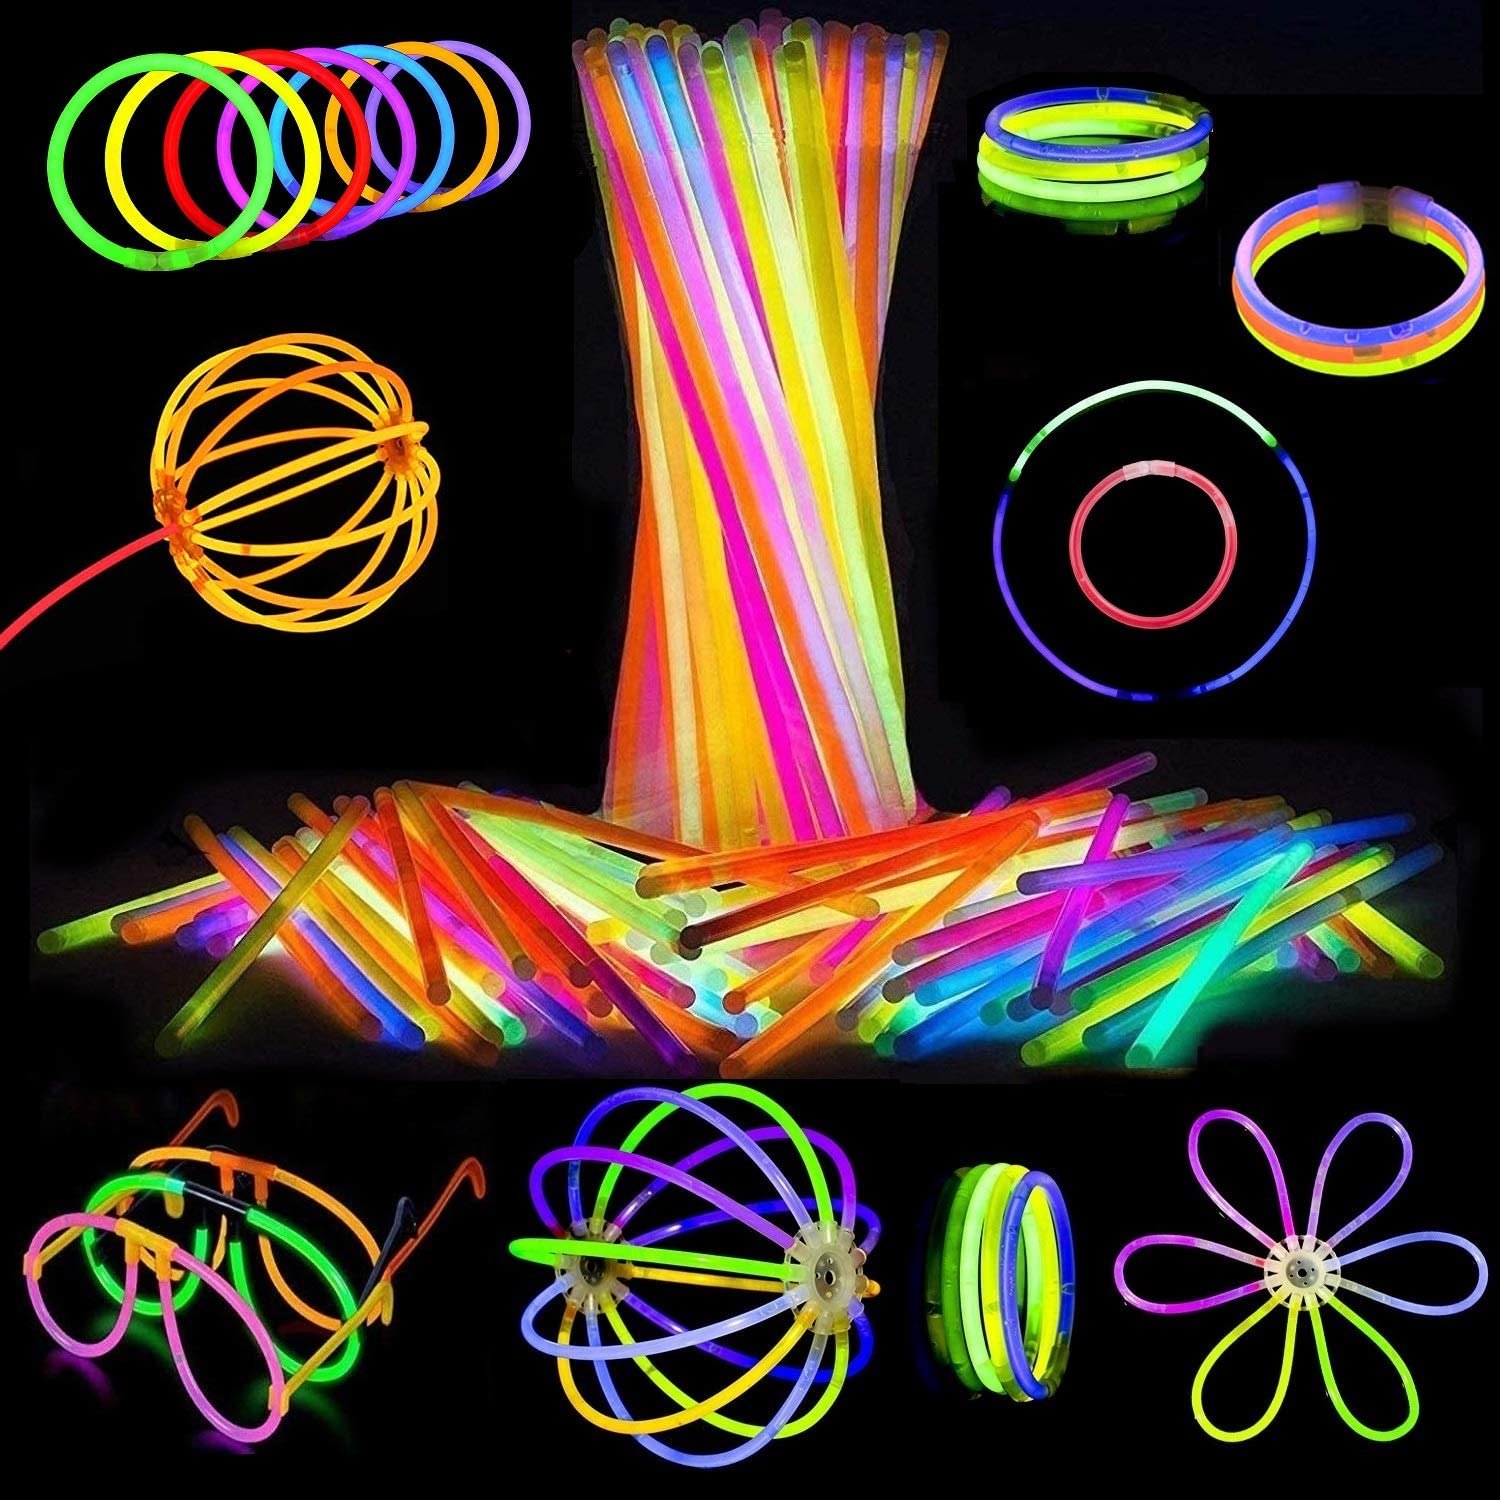 Glow Sticks Bulk 1000 Count - 8 Glow In the Dark Light Sticks - Party  Favors & Supplies for Camping, Raves & Birthday Parties 